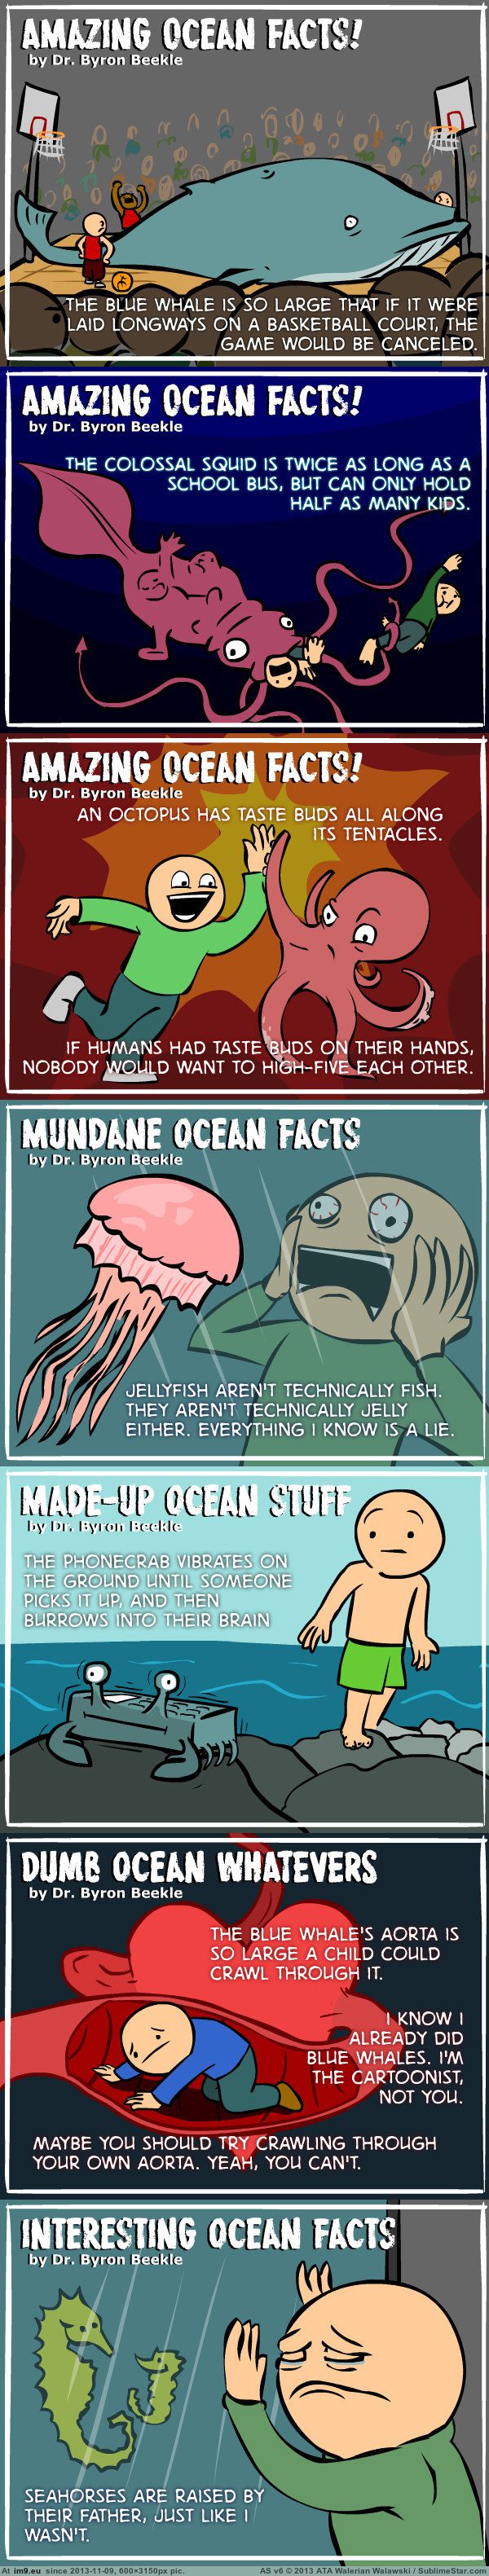 [Funny] Real Ocean Facts. Broaden your minds, motherfuckers. (in My r/FUNNY favs)